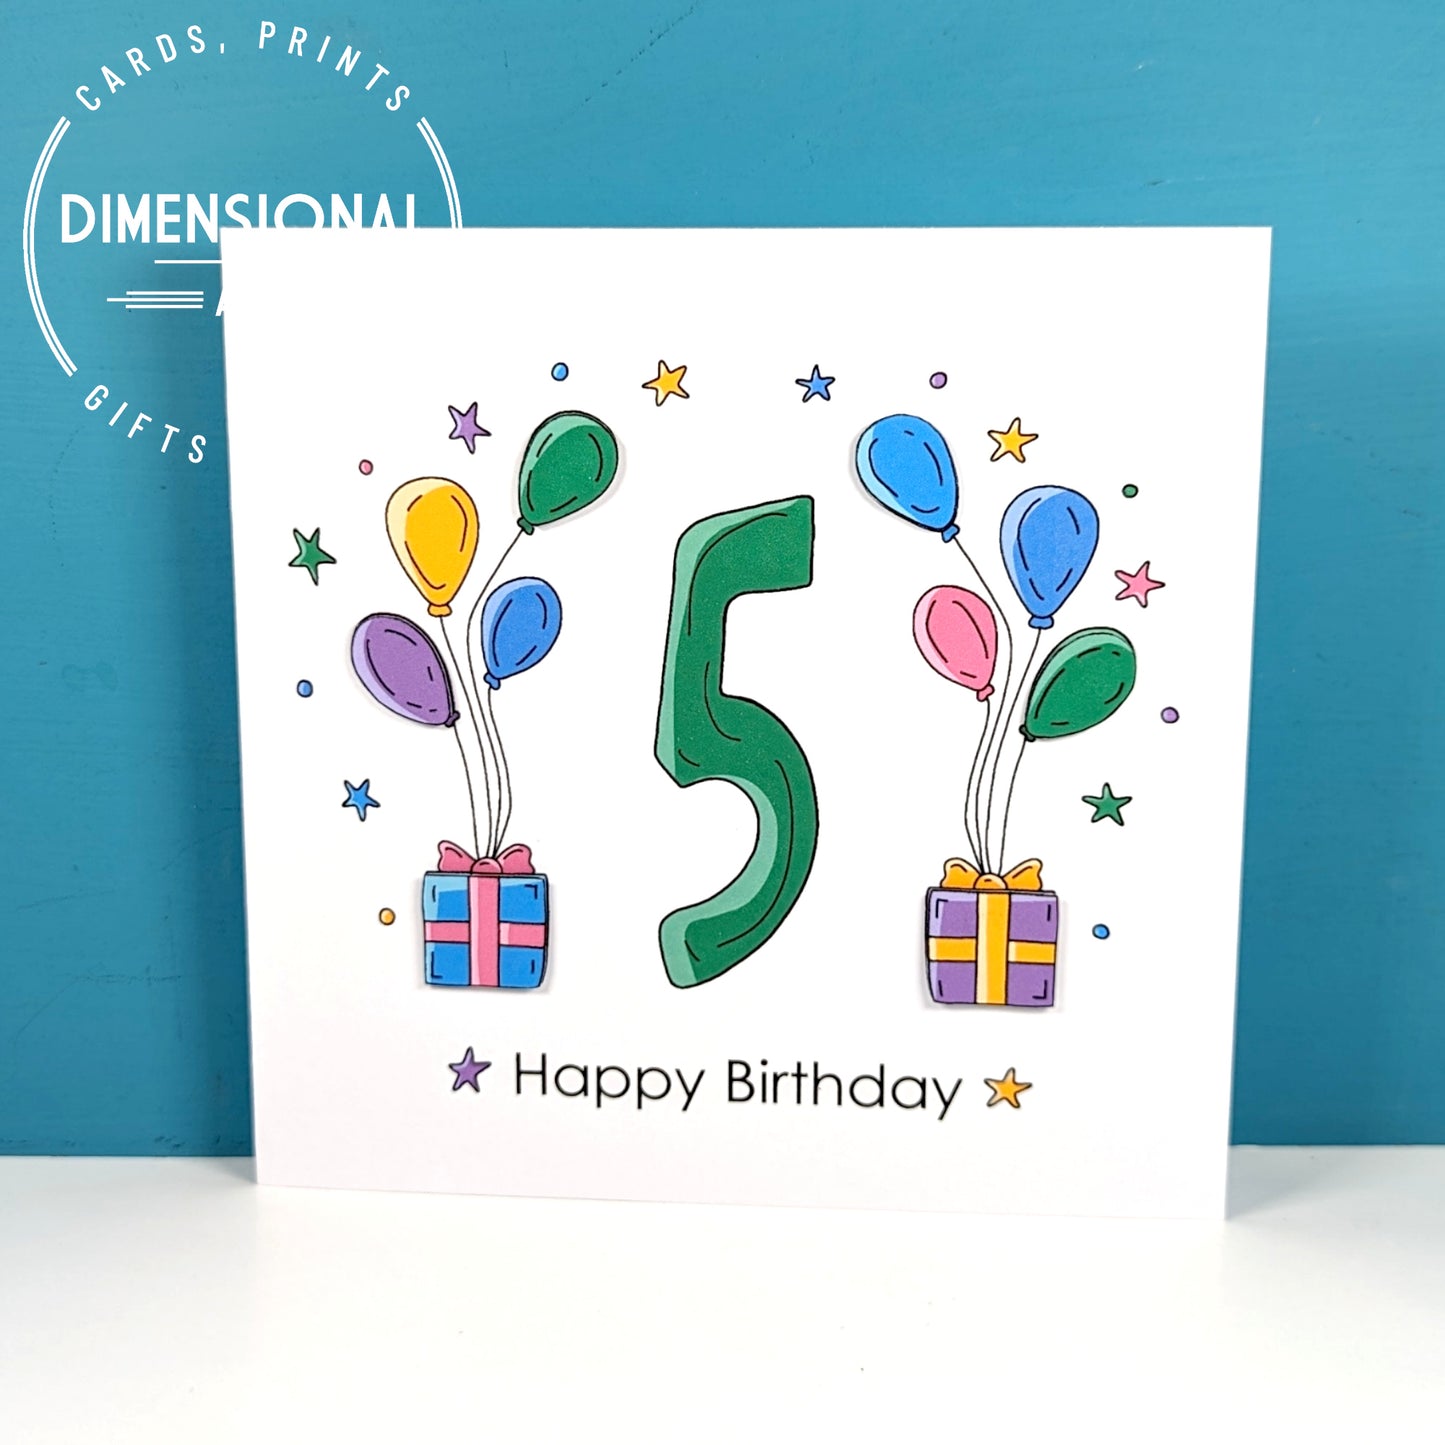 5th balloons and presents Birthday Card